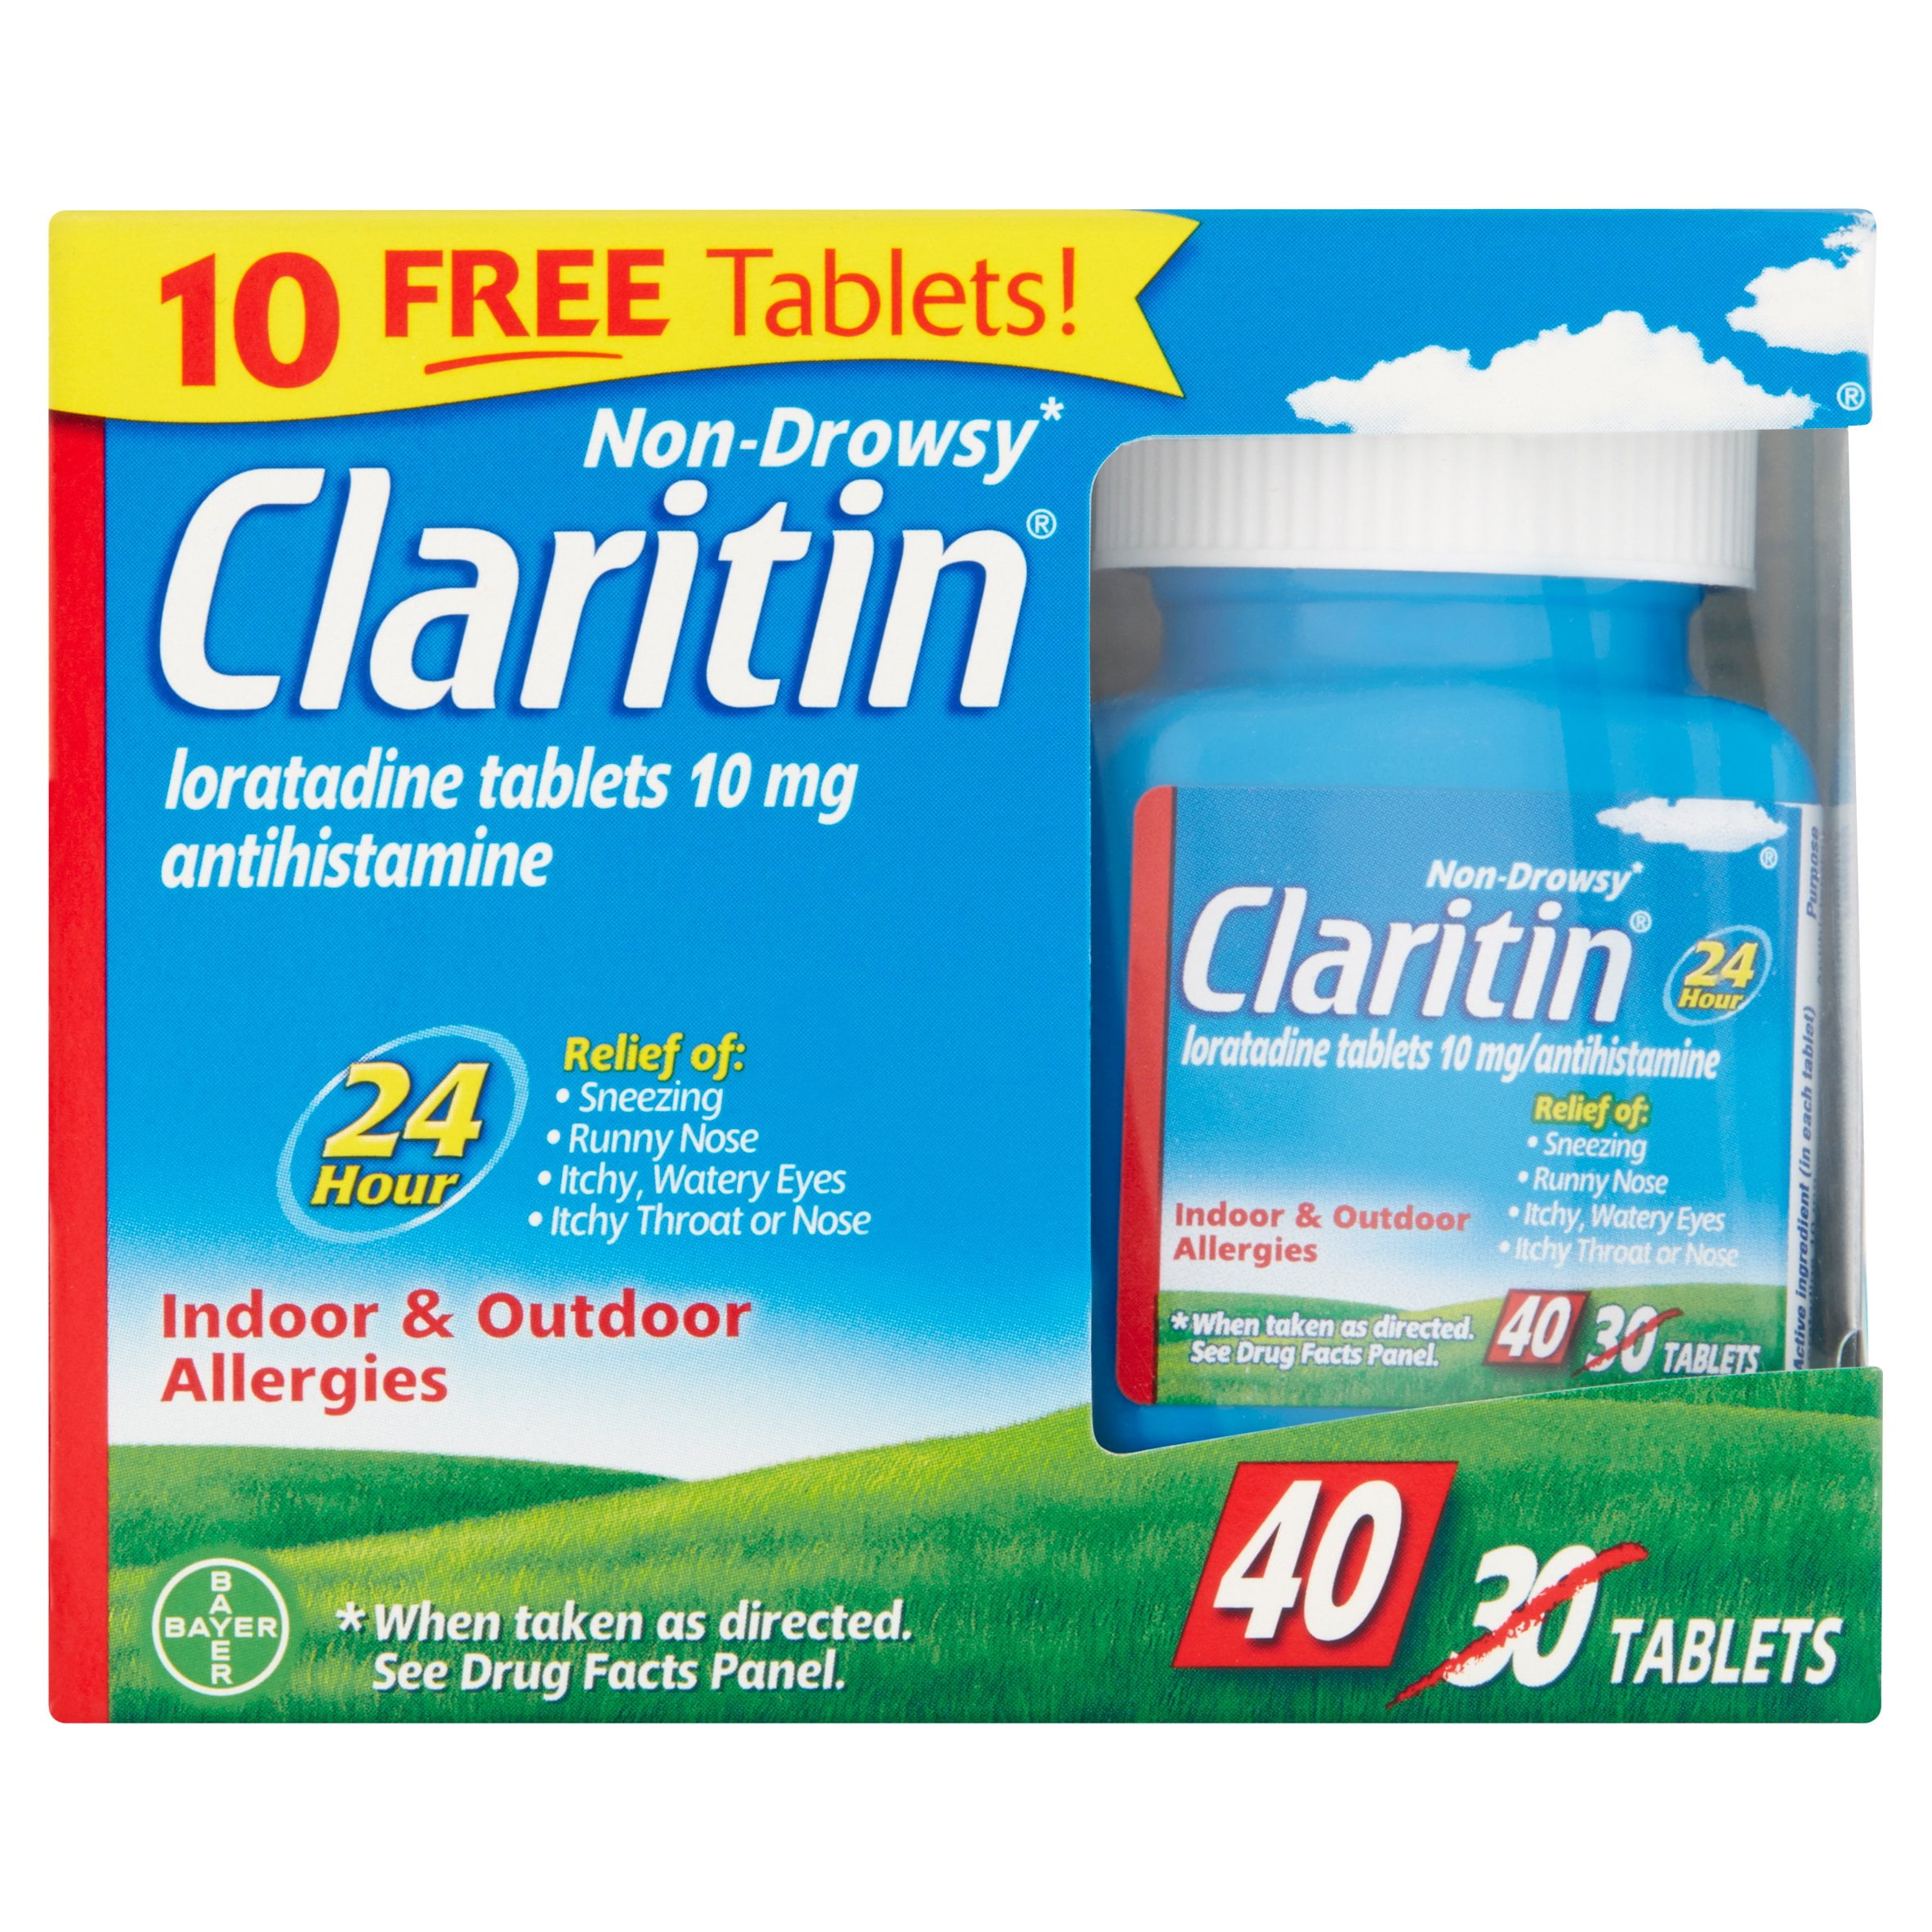 Cheapest place to buy claritin 10 mg